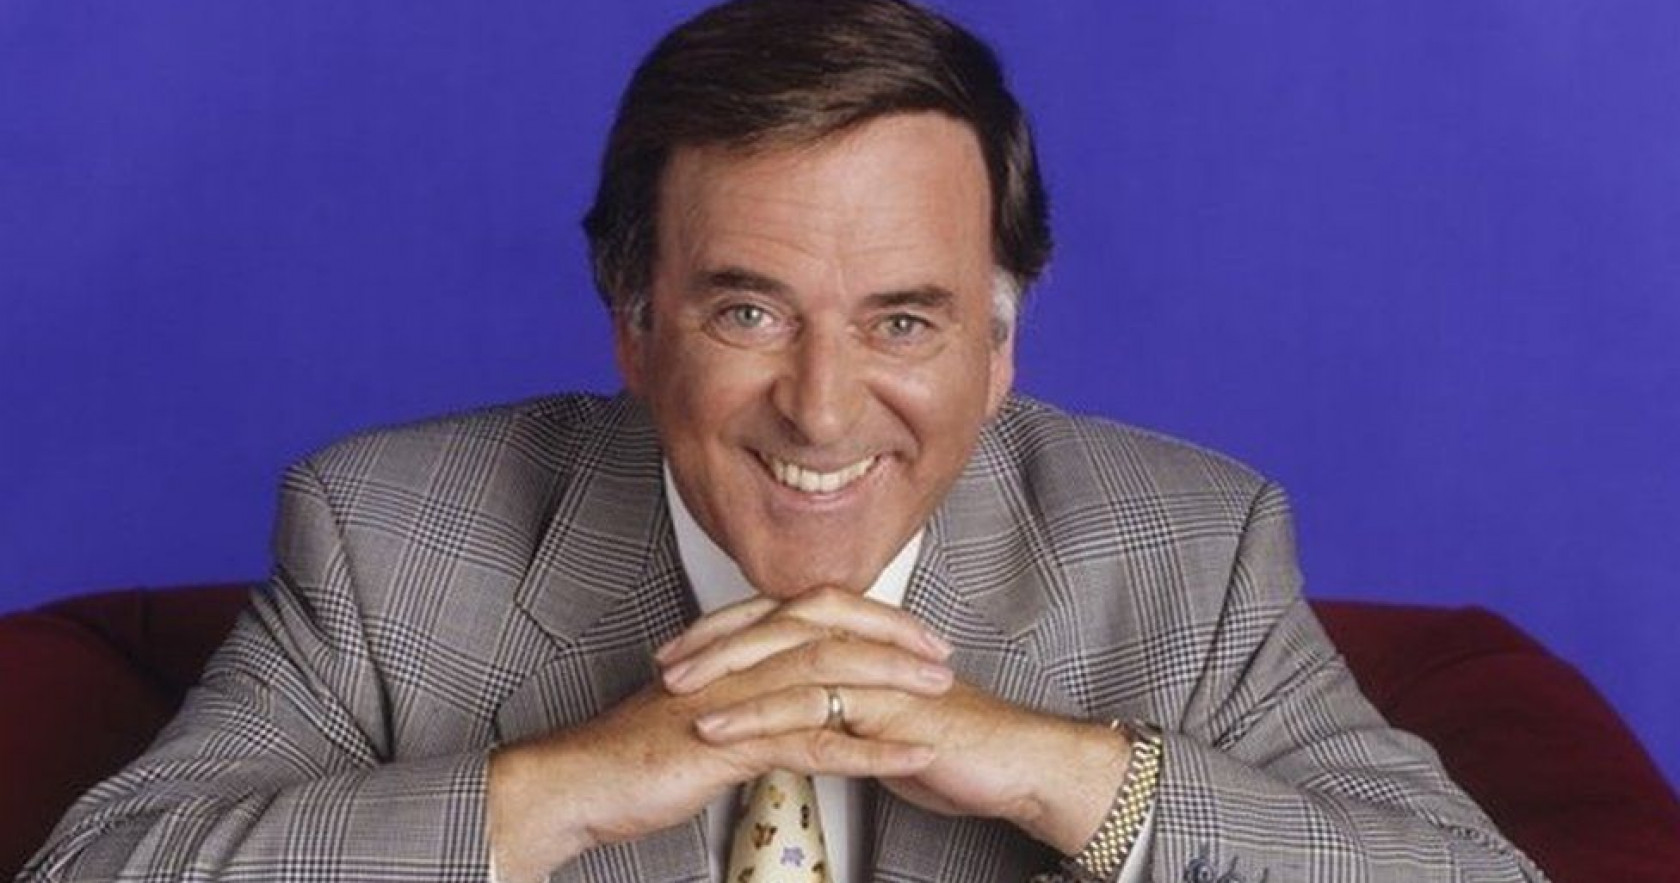 How tall is Terry Wogan?